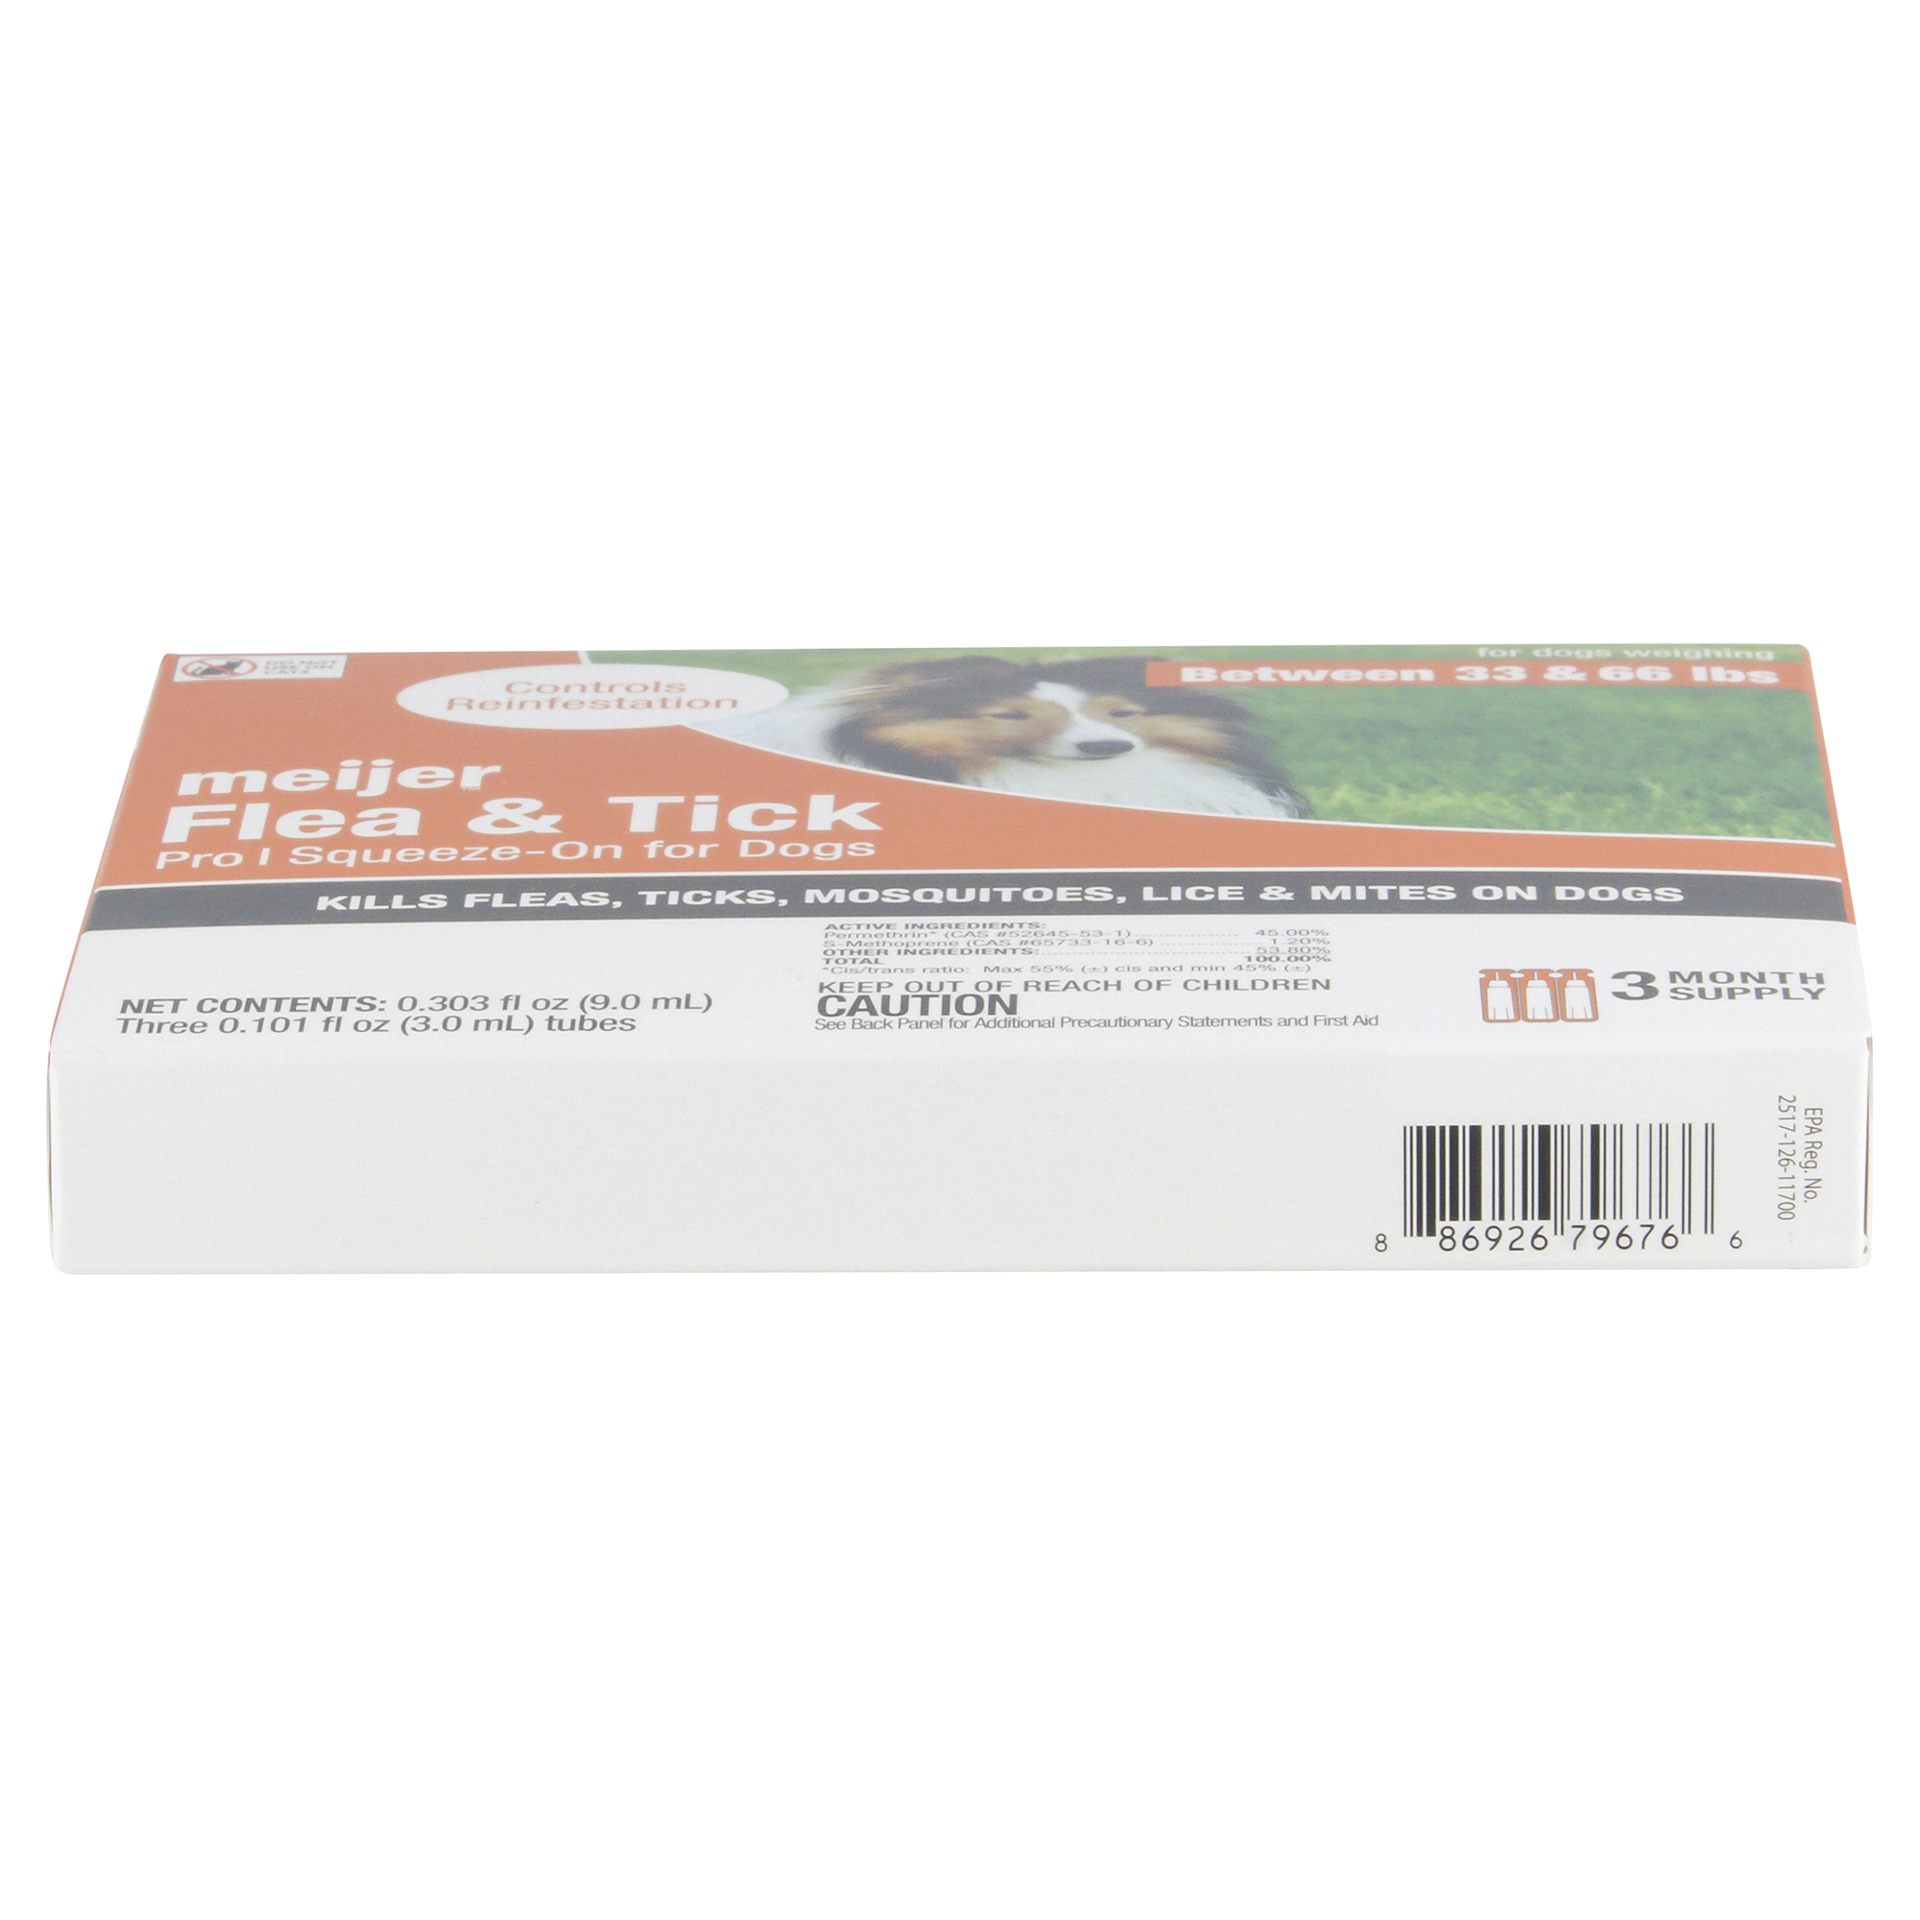 slide 21 of 21, Meijer Pro I Squeeze-On Flea & Tick for Dogs, 33 ct; 66 lb, 3 ct